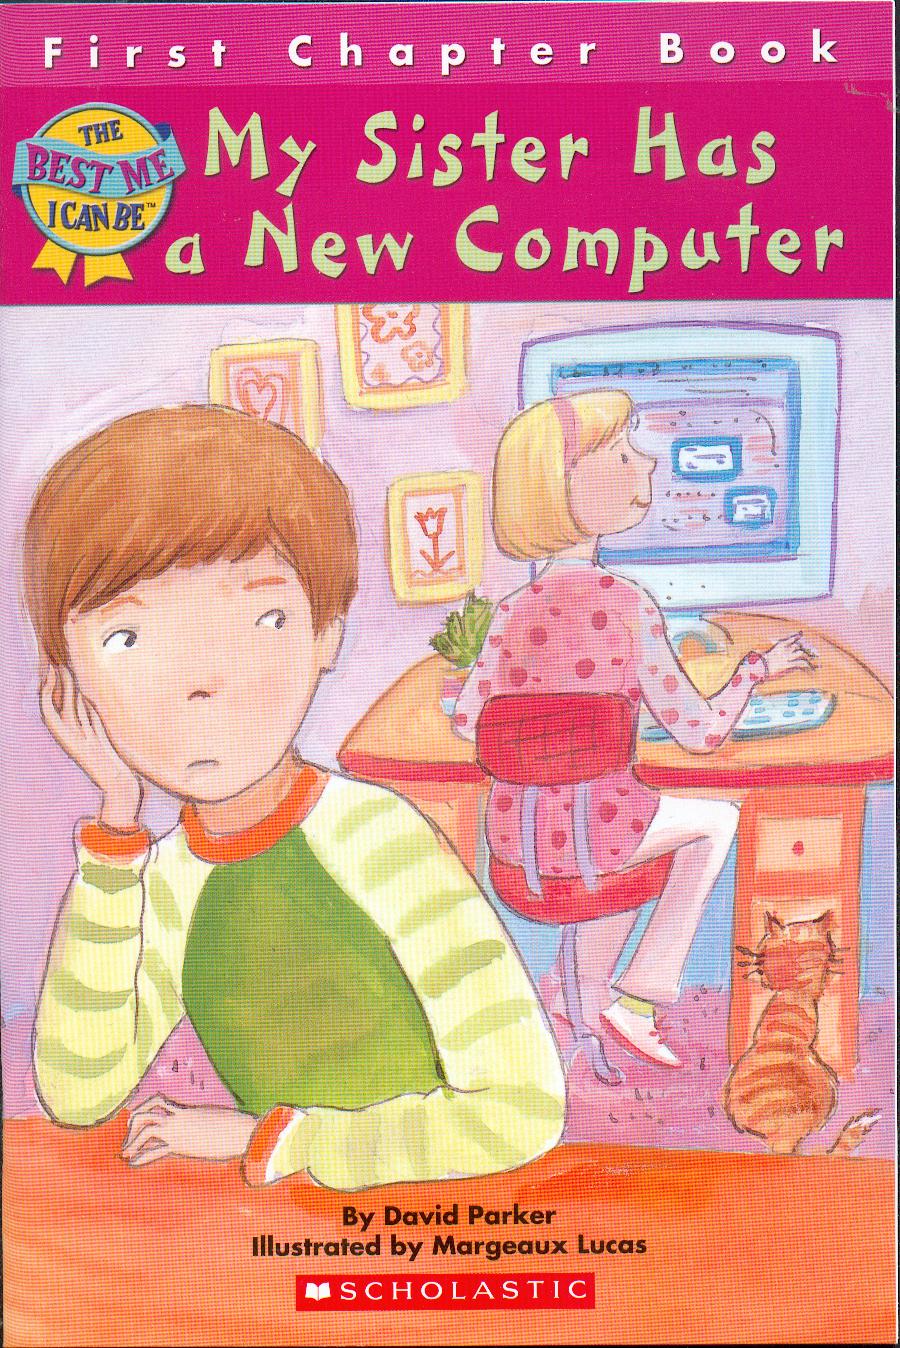 My sister has a new computer / David Parker ; illustrated by Margeaux Lucas.